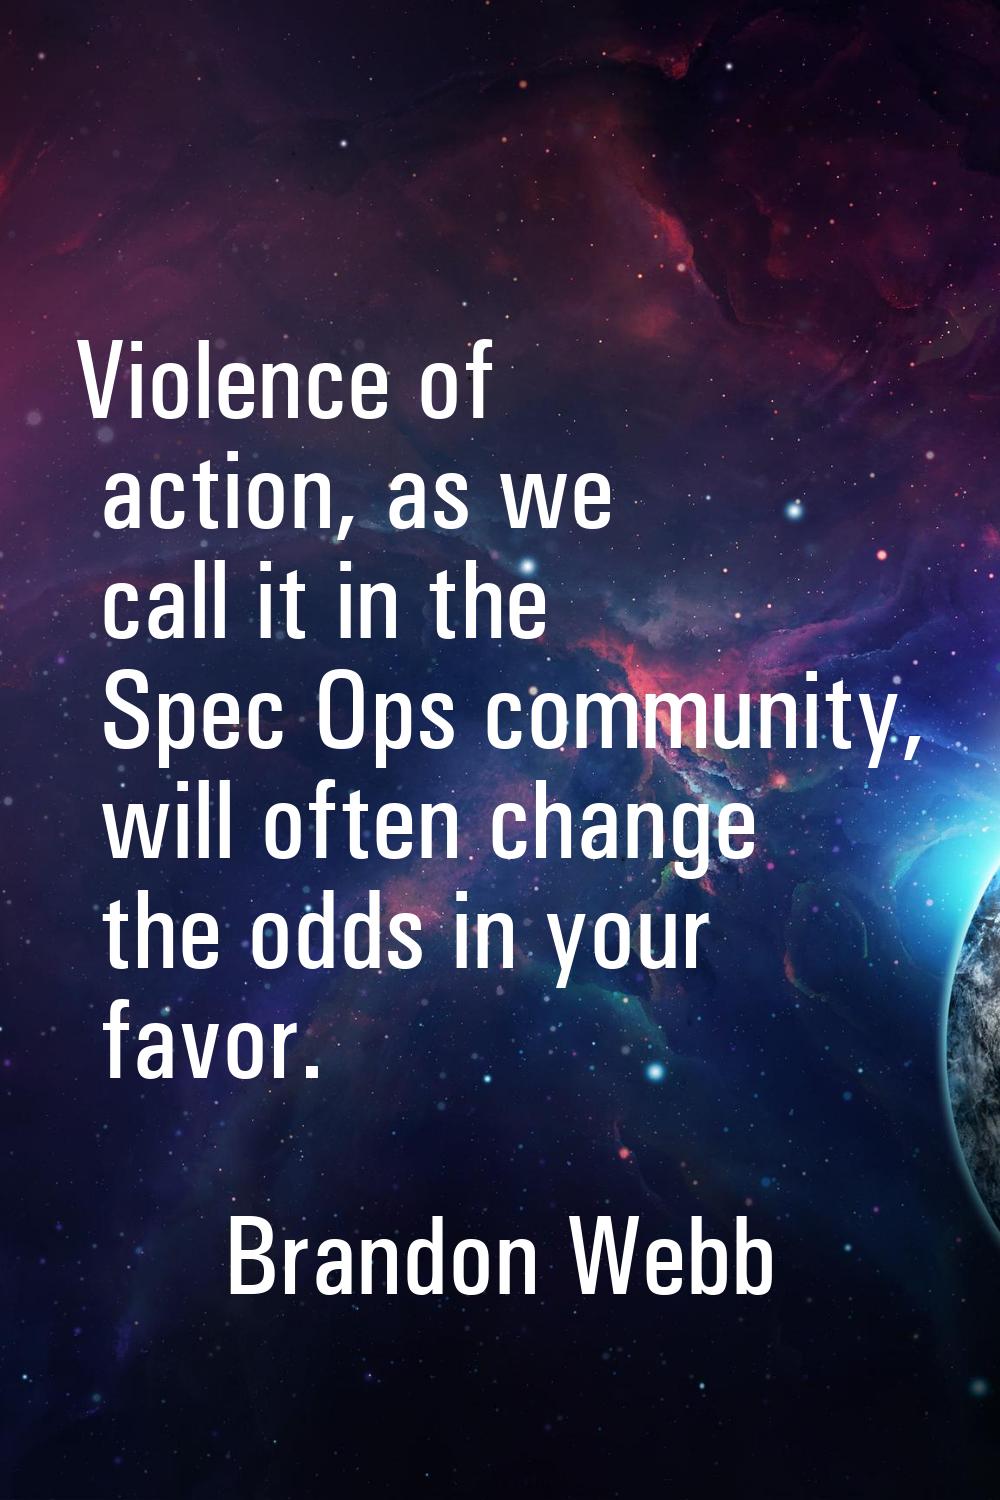 Violence of action, as we call it in the Spec Ops community, will often change the odds in your fav